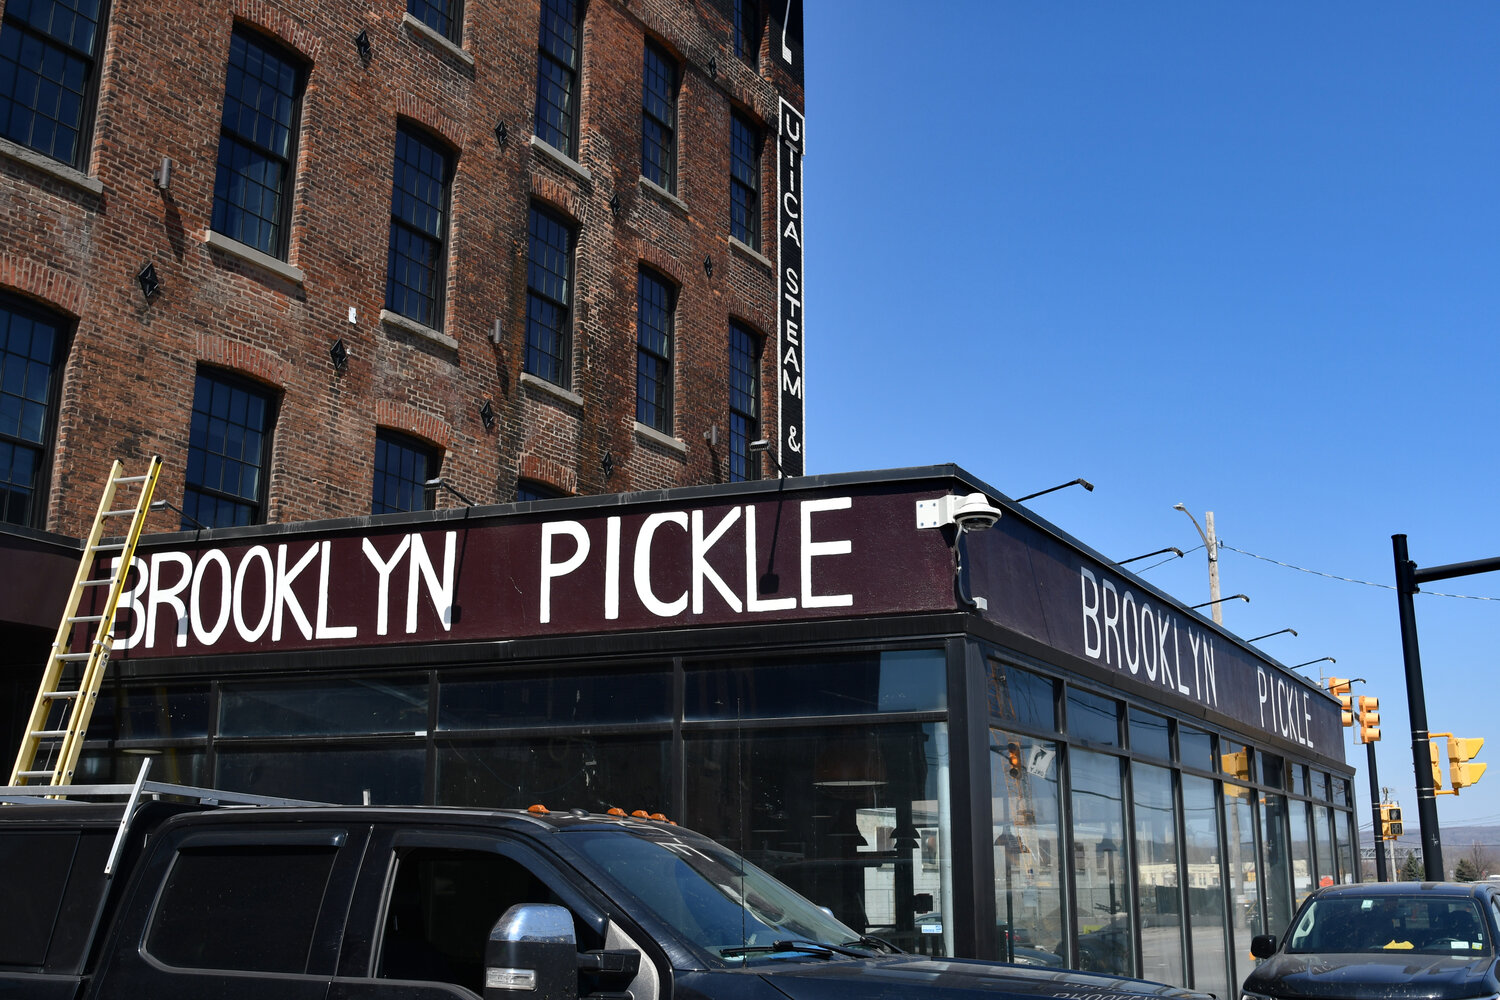 Brooklyn Pickle, 600 State St. in Utica, is currently going through construction setbacks as the opening date has been pushed back by another week. The Syracuse-based establishment will now have a grand opening on Monday, April 24.